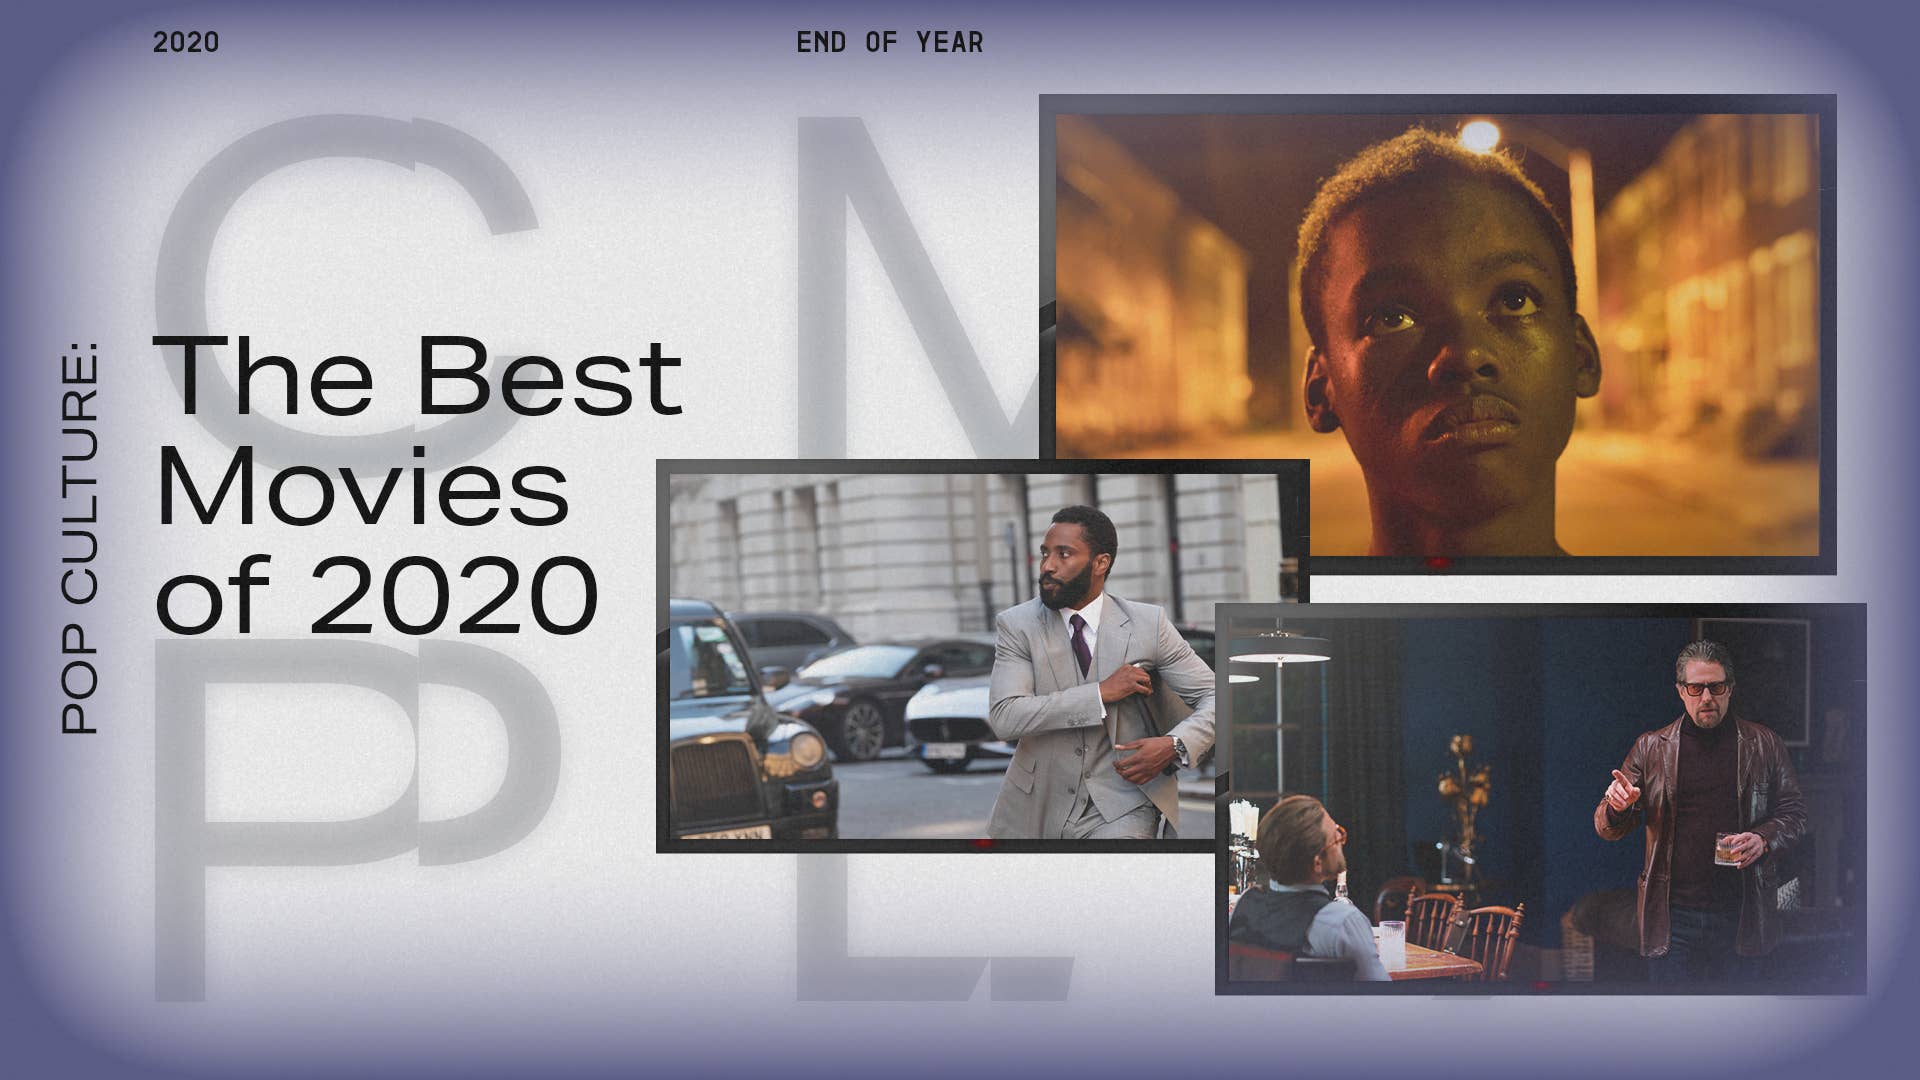 The Best Movies of 2020